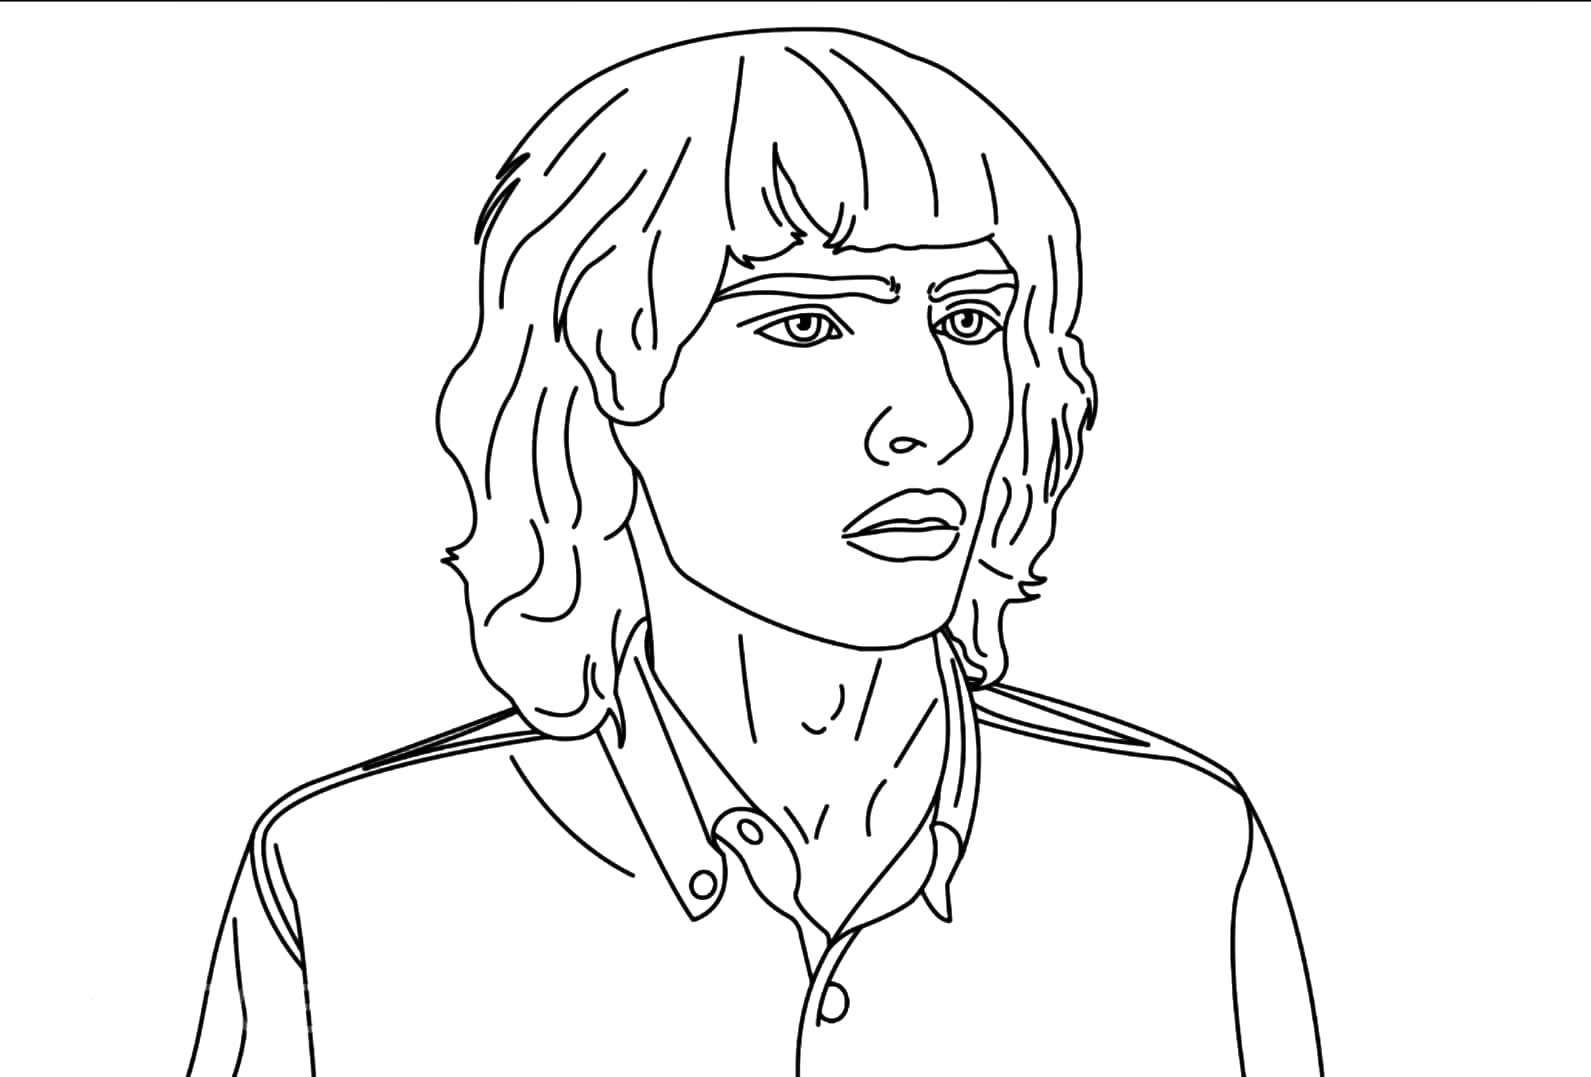 Mike from Stranger Things coloring page - Download, Print or Color ...